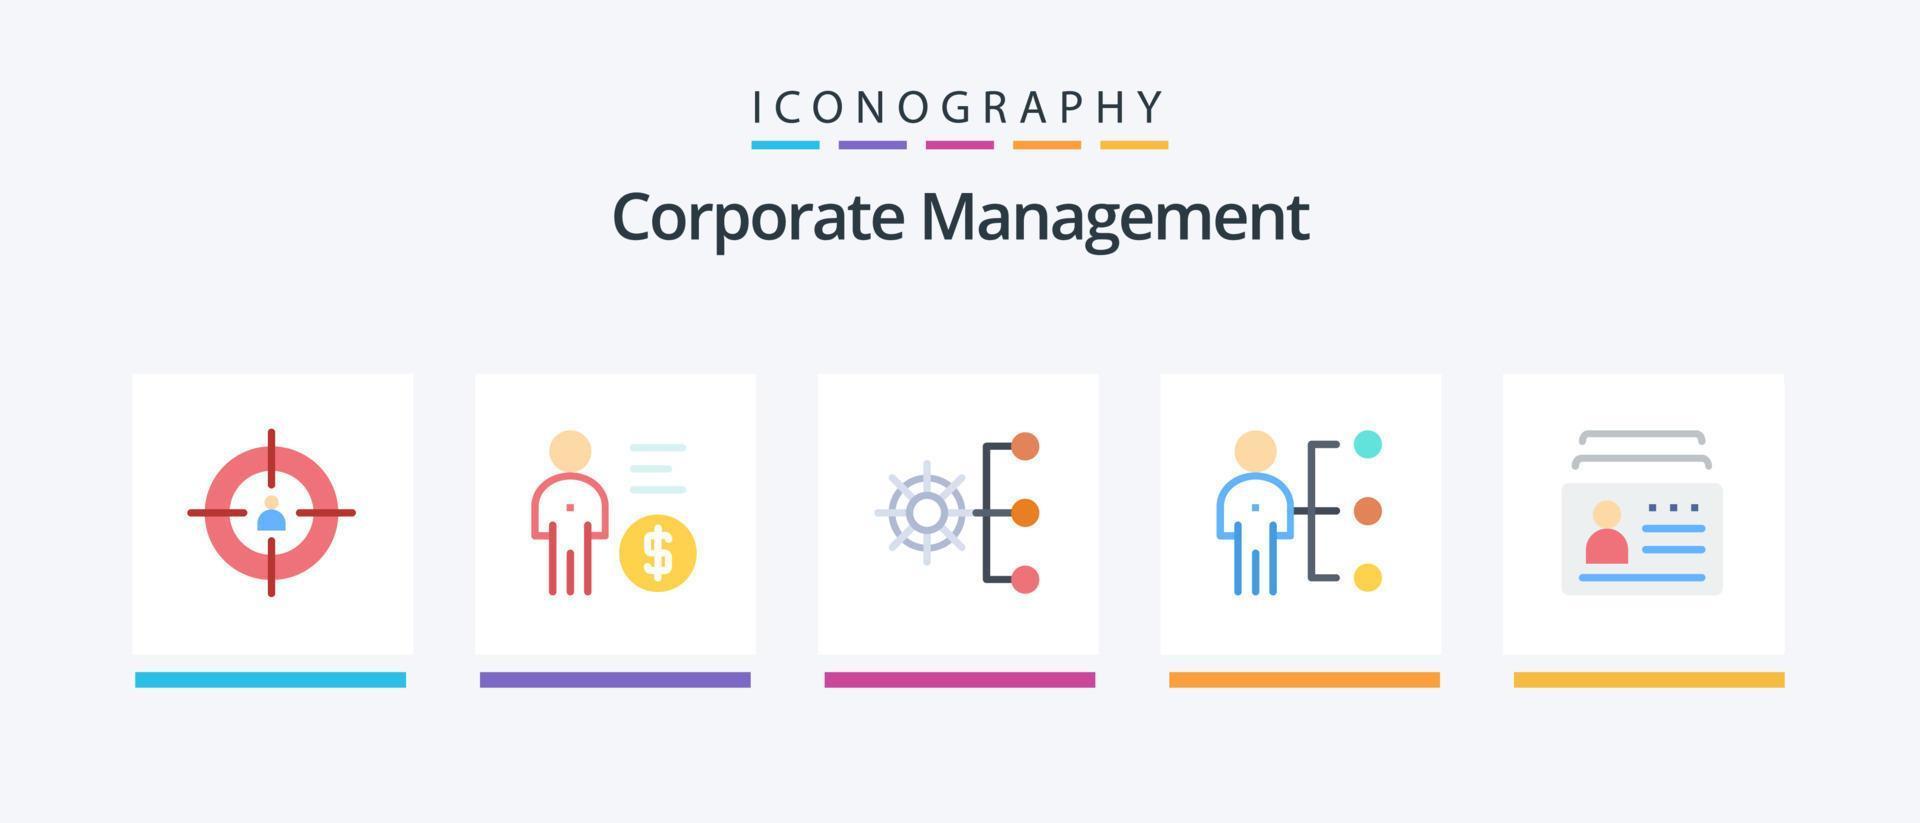 Corporate Management Flat 5 Icon Pack Including job. abilities. money. organization. corporate. Creative Icons Design vector